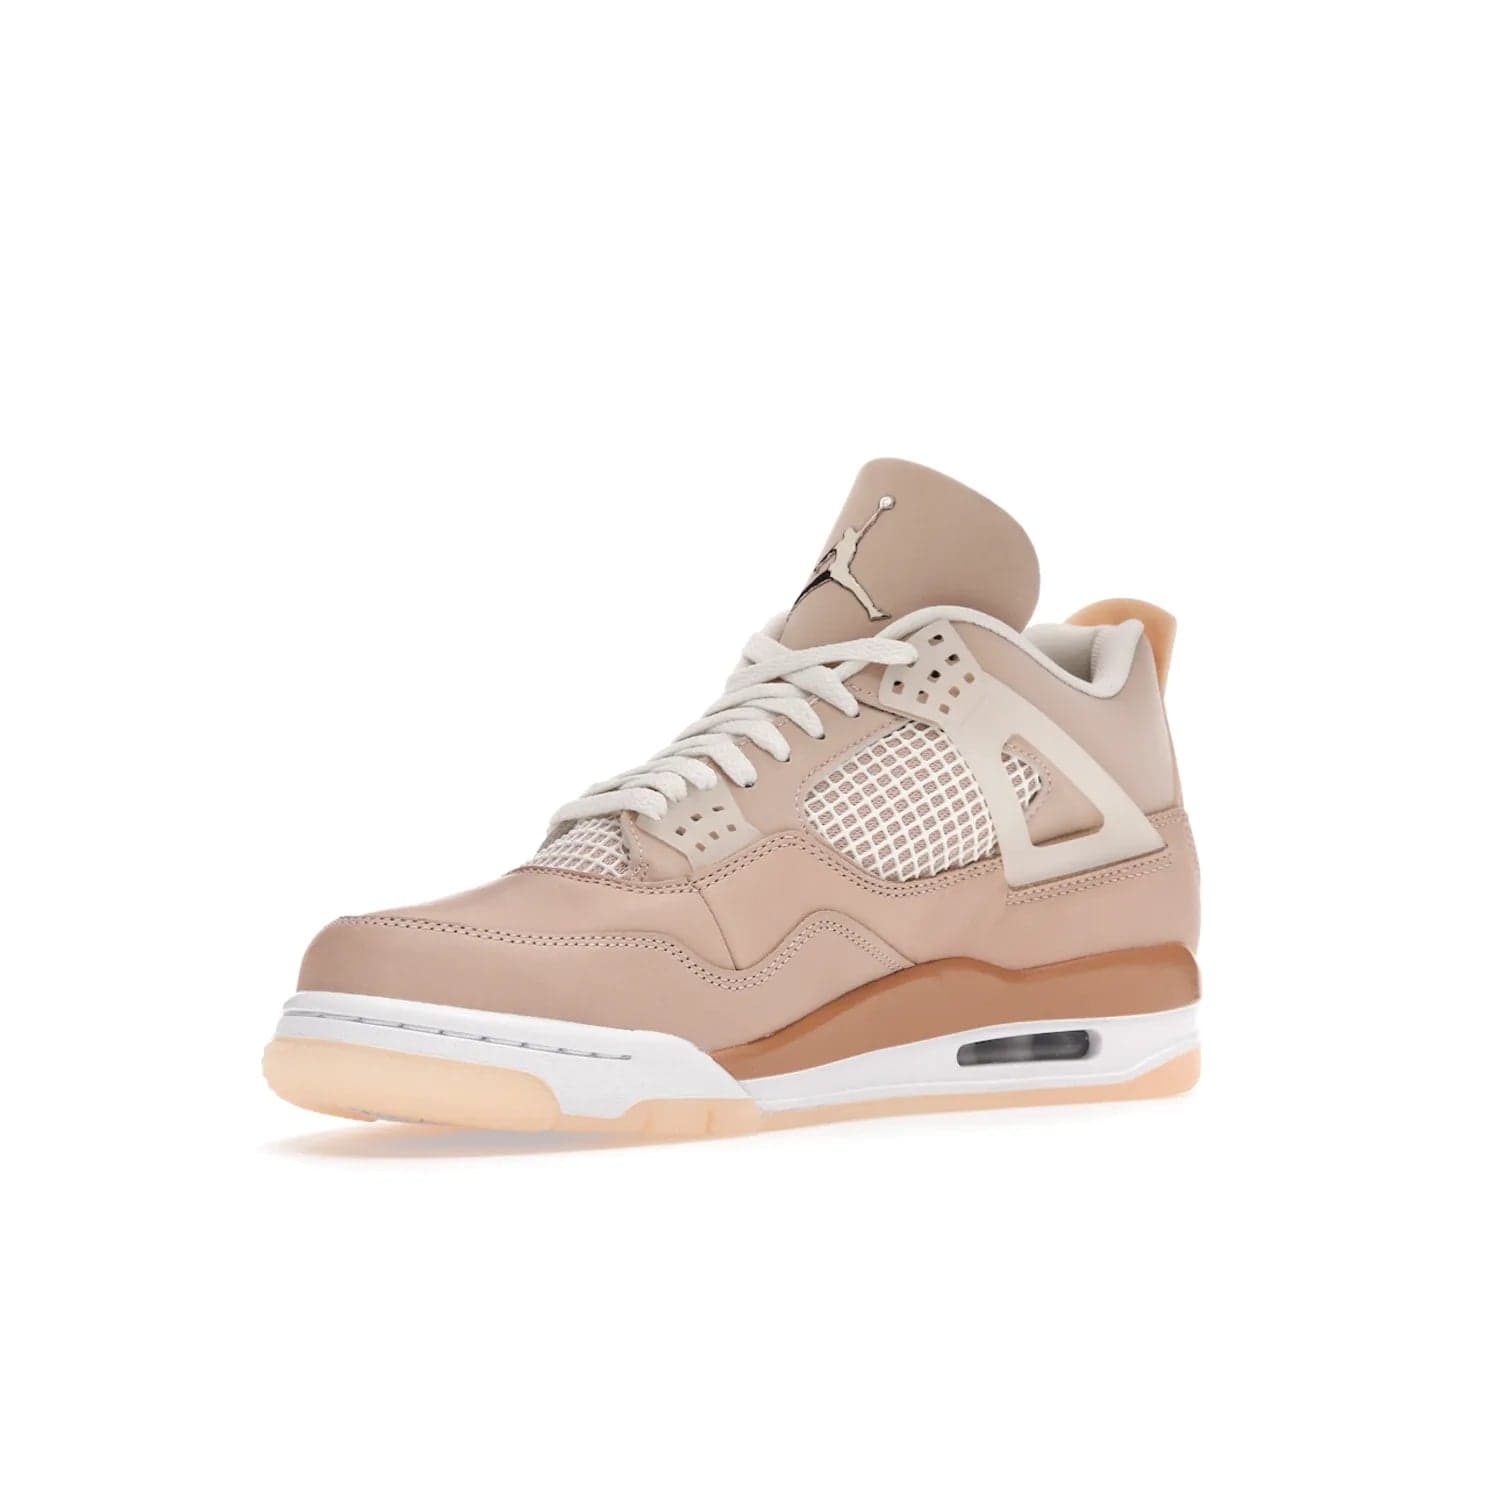 Jordan 4 Retro Shimmer (Women's) - Image 15 - Only at www.BallersClubKickz.com - Air Jordan 4 Shimmer (W): A women's-exclusive design with a buttery beige upper and Silver/Orange Bronze details. Durabuck and metallic Jumpman branding elevate the iconic silhouette. Shop now.